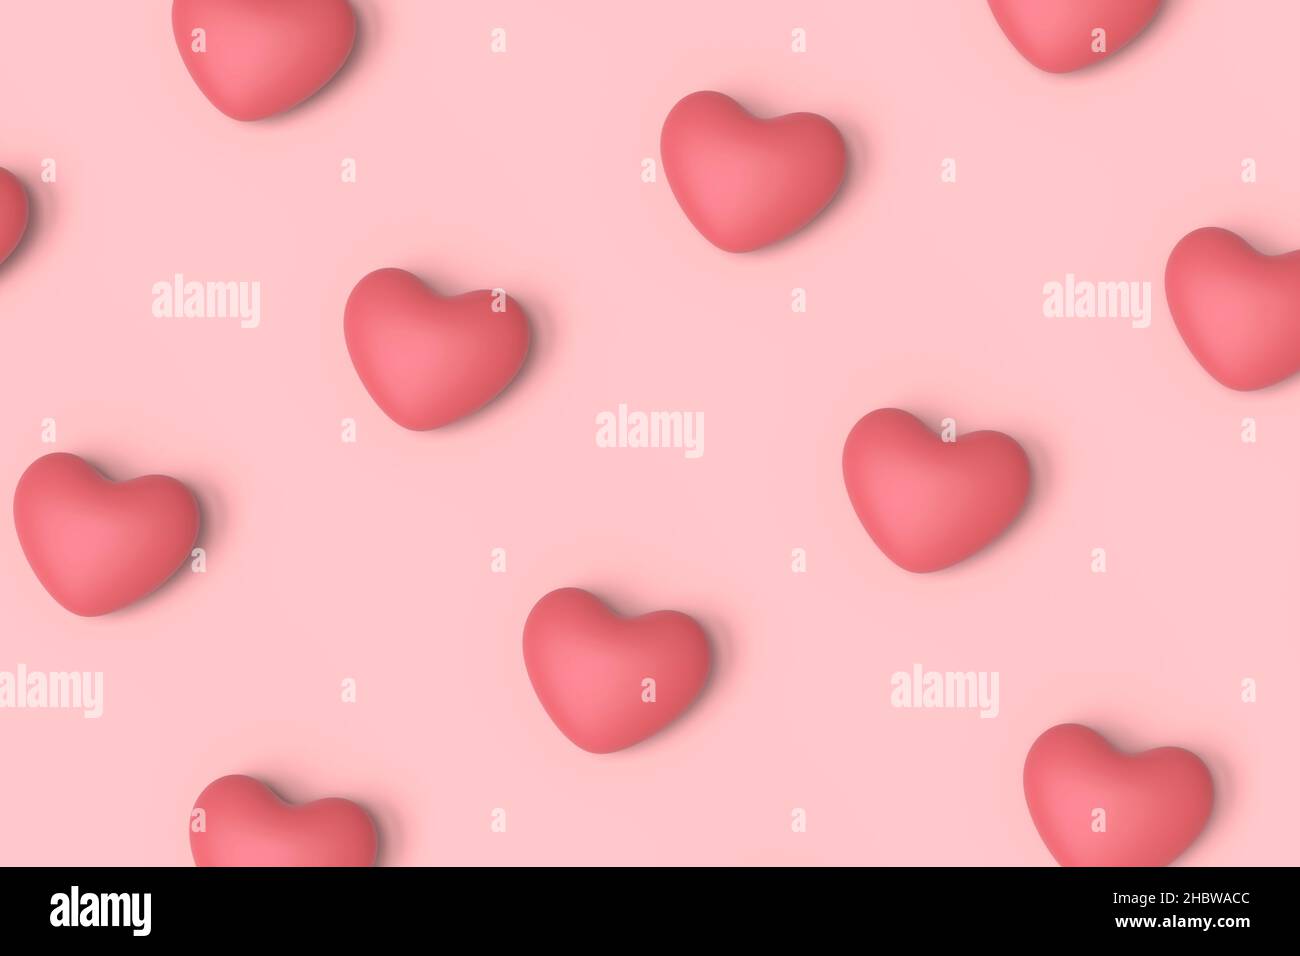 Pink pattern background with hearts. 3D illustration Stock Photo